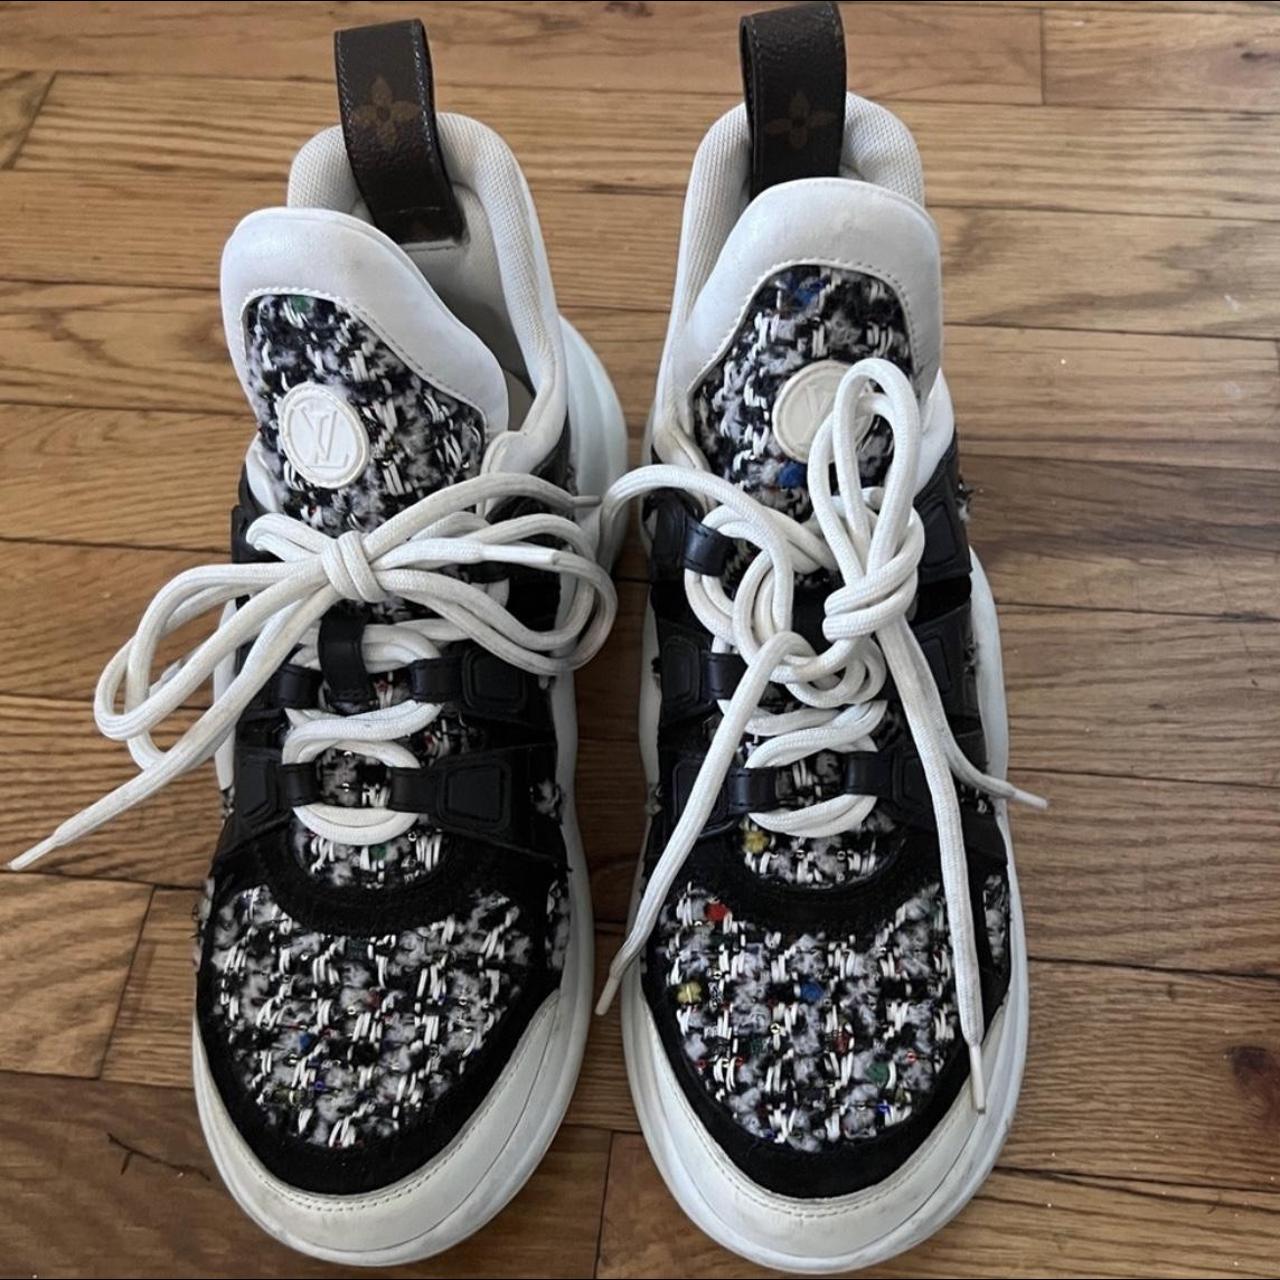 womens louis vuitton archlight sneakers